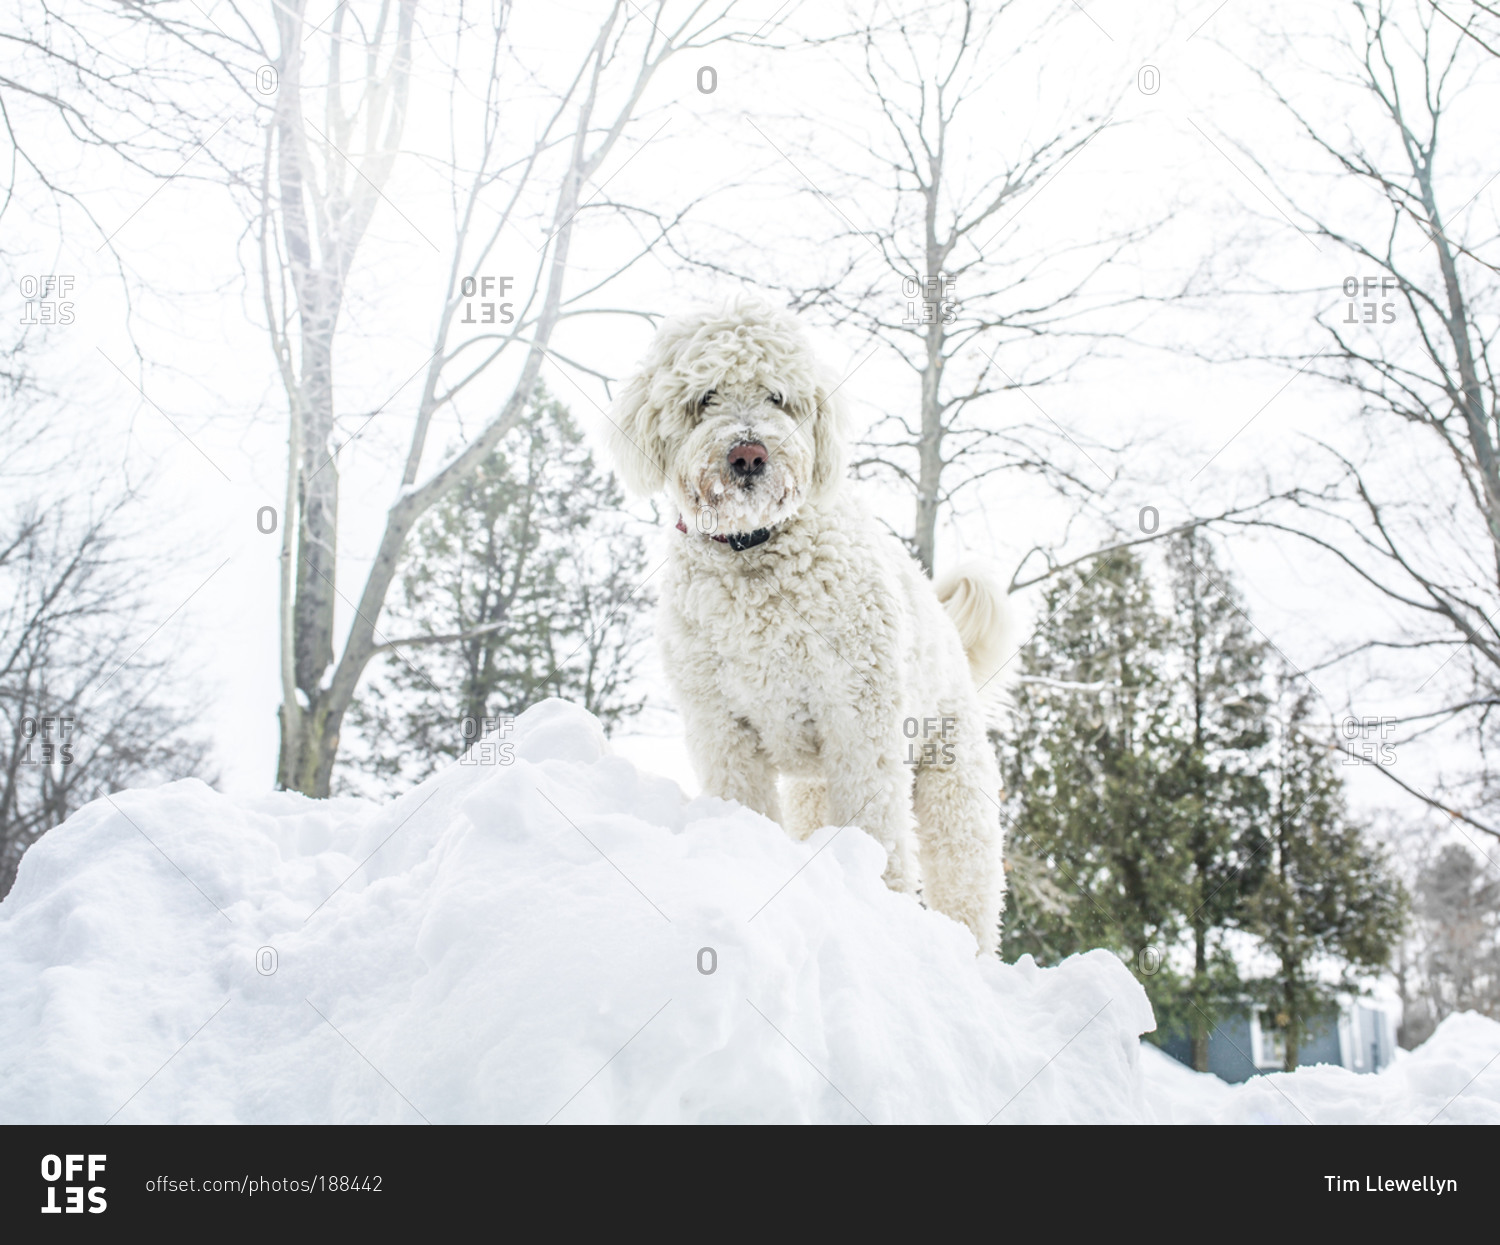 A white dog on a pile of snow